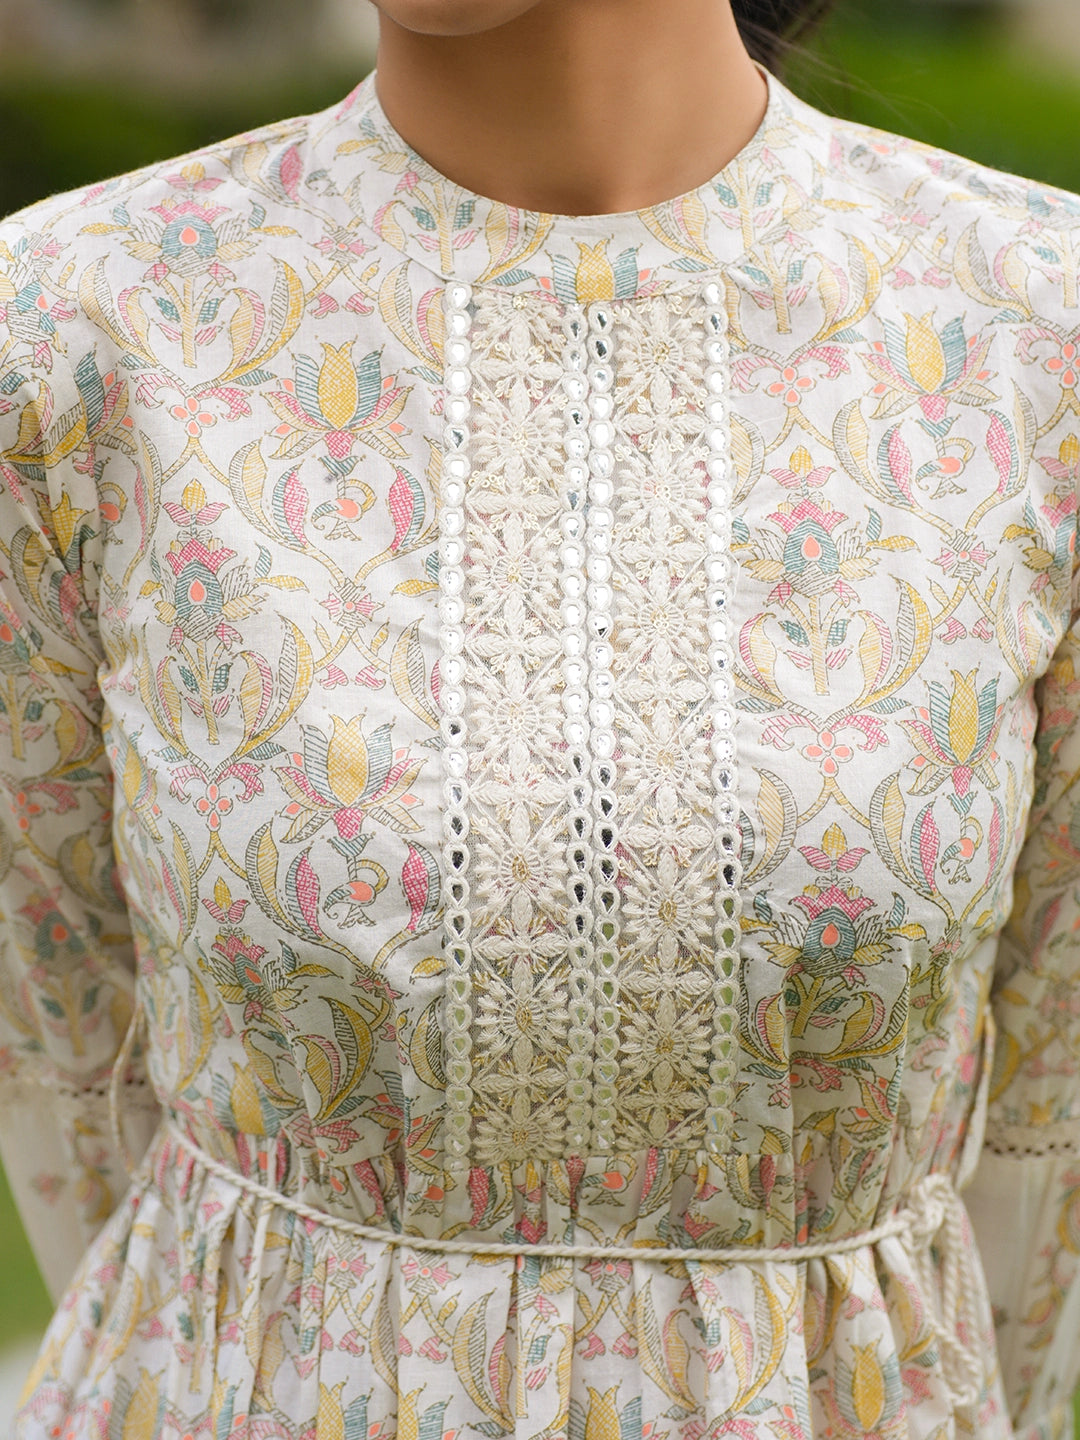 Blooms and Lace: White Floral Embroidered Shorts